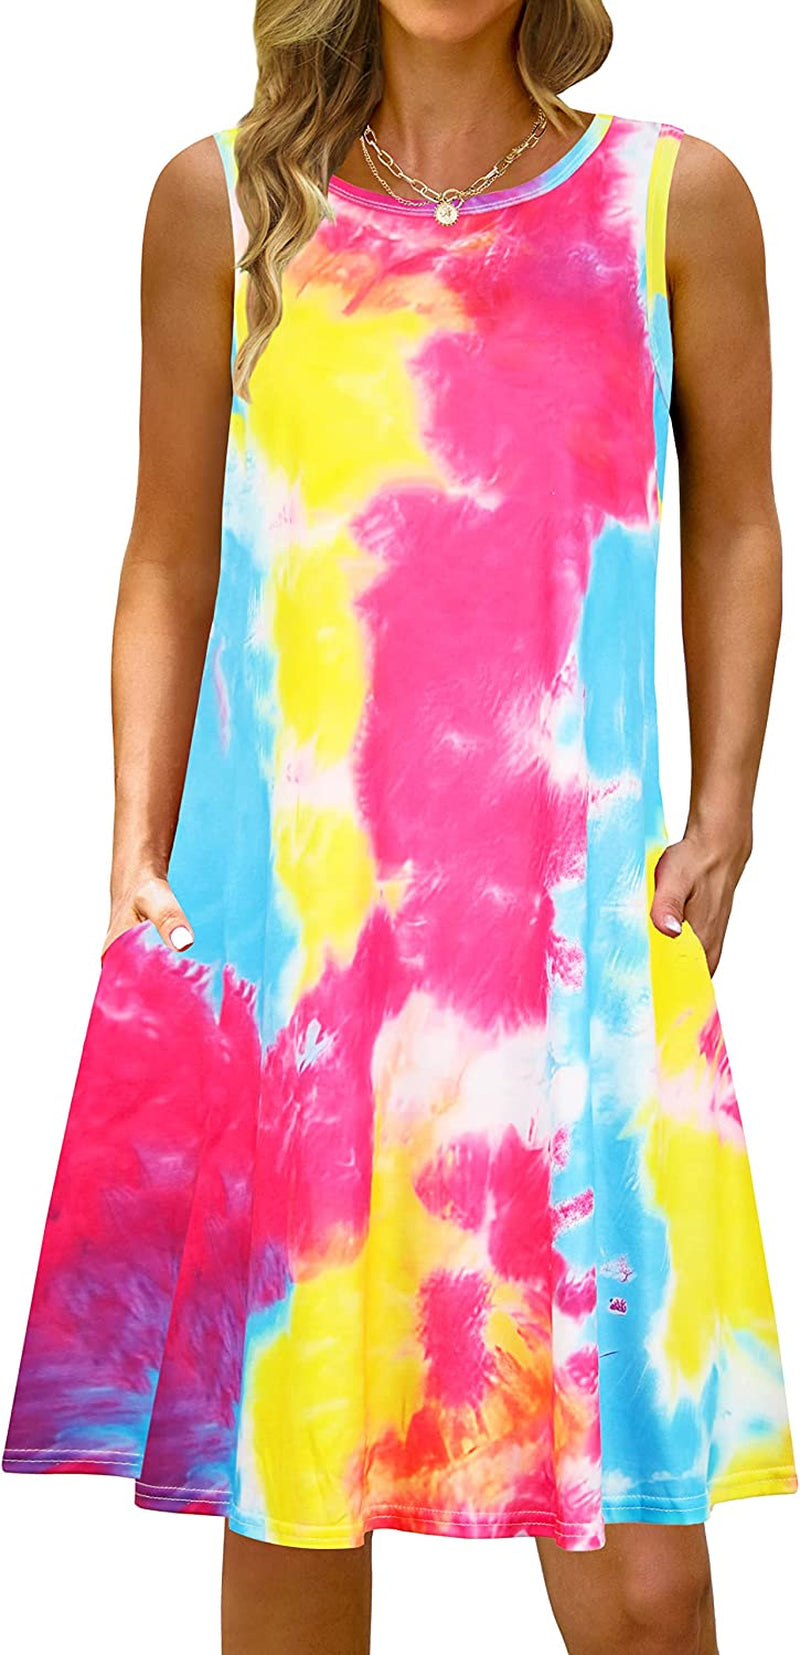 Summer Casual Tshirt Dresses for Women Swing Sun Dress Beach Swimsuit Cover Ups with Pockets